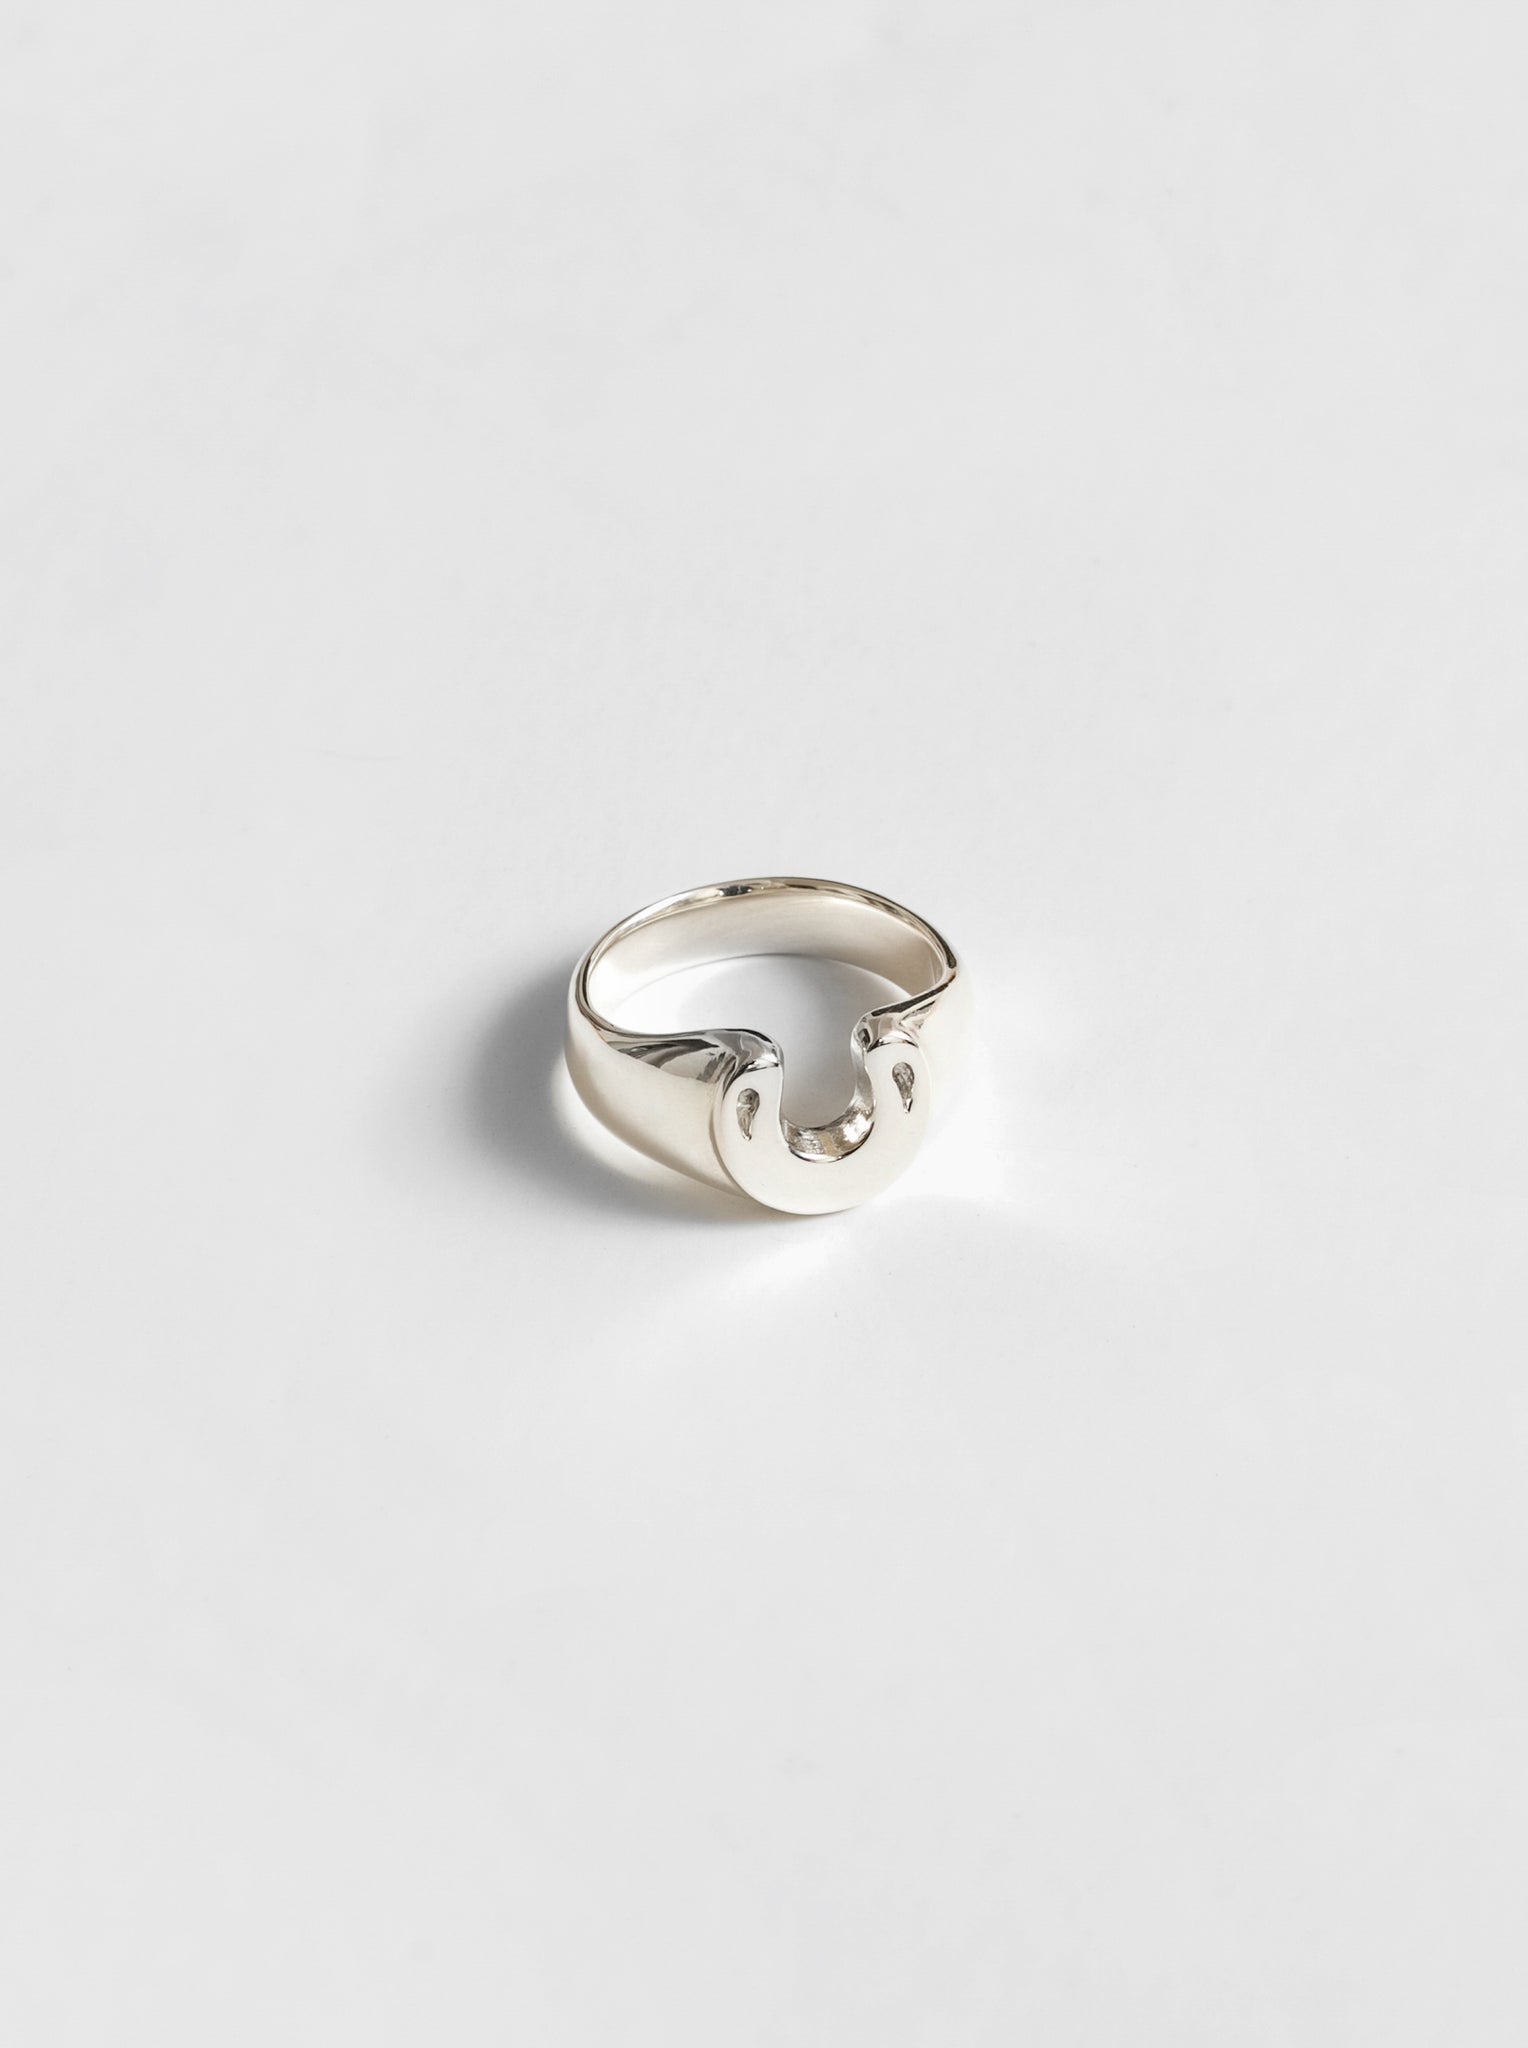 Horseshoe Ring in Sterling Silver